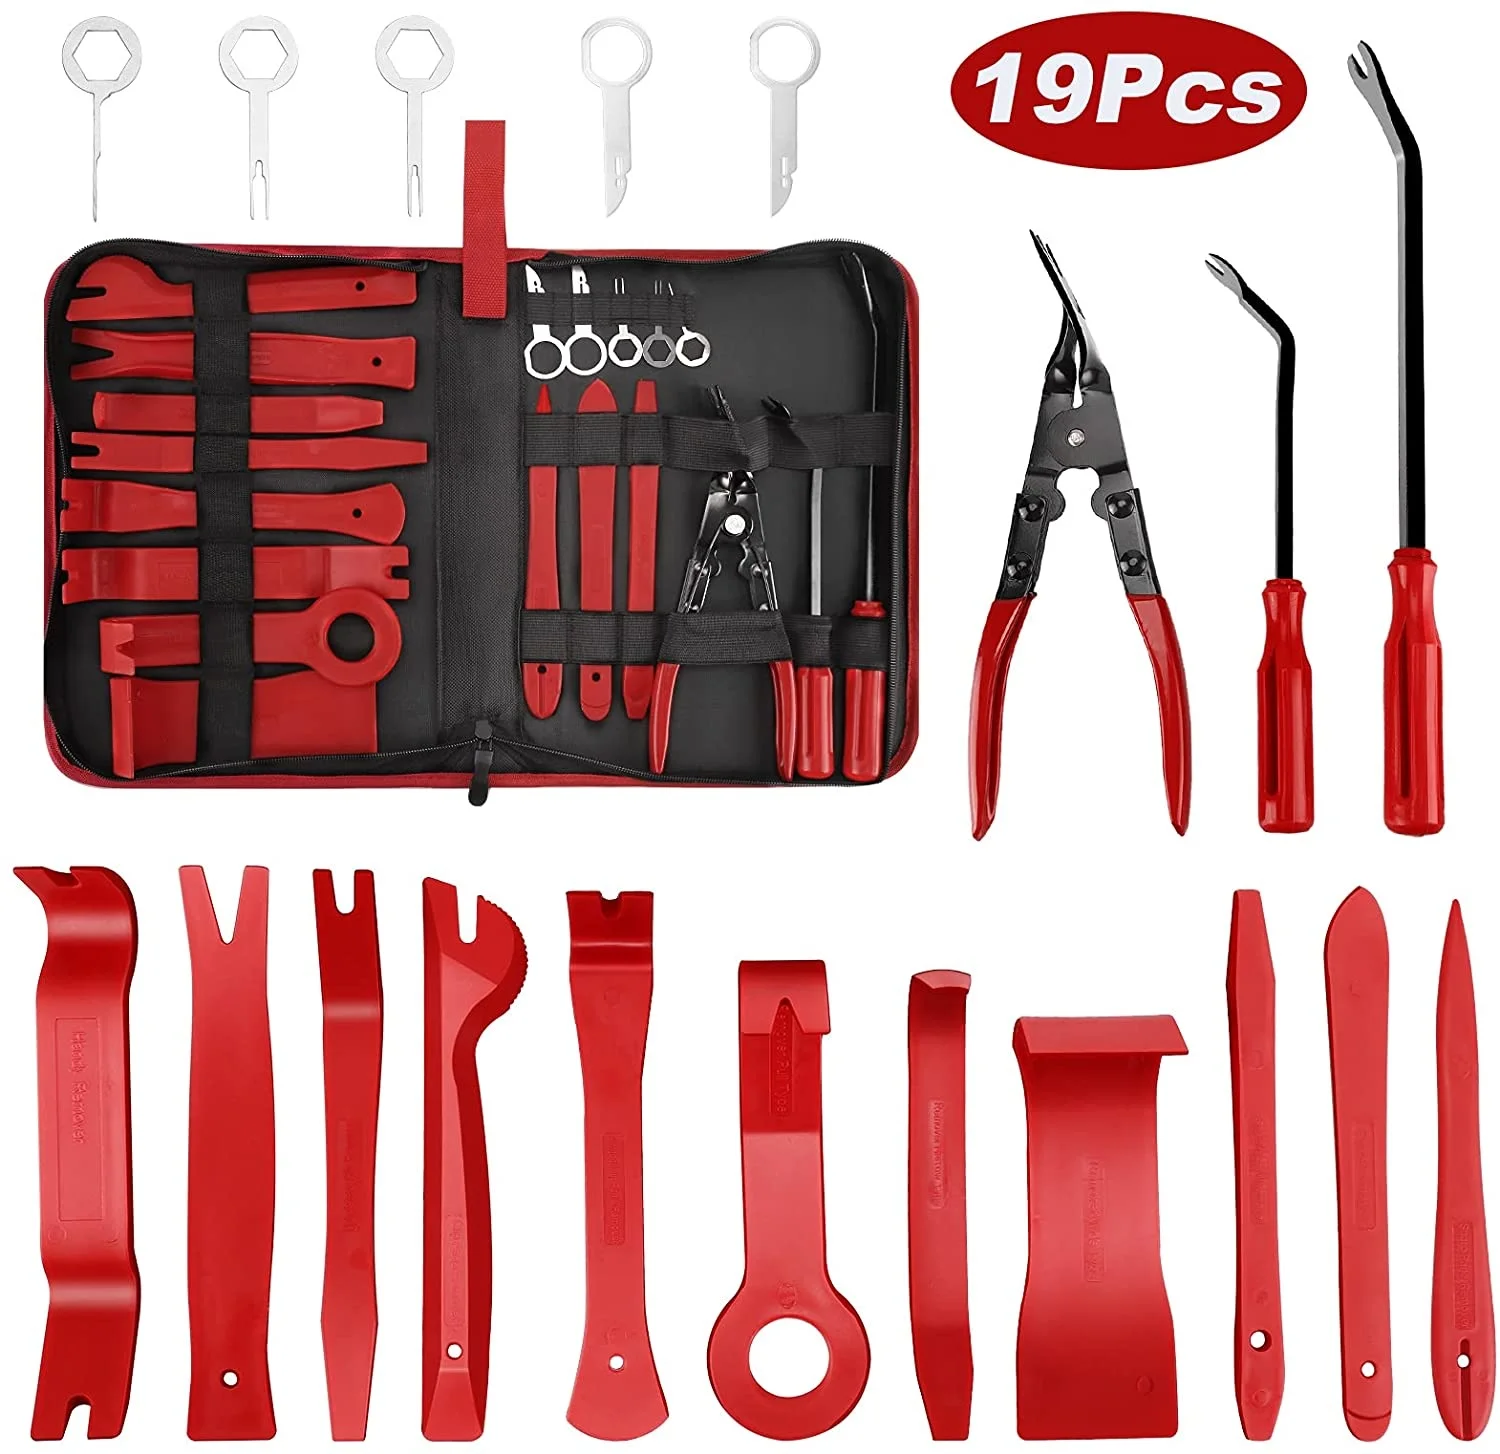 

19pcs Car Hand Tool Set Pry Disassembly Tool Interior Door Clip Panel Trim Dashboard Removal Tool Kit DVD Stereo Refit Kits